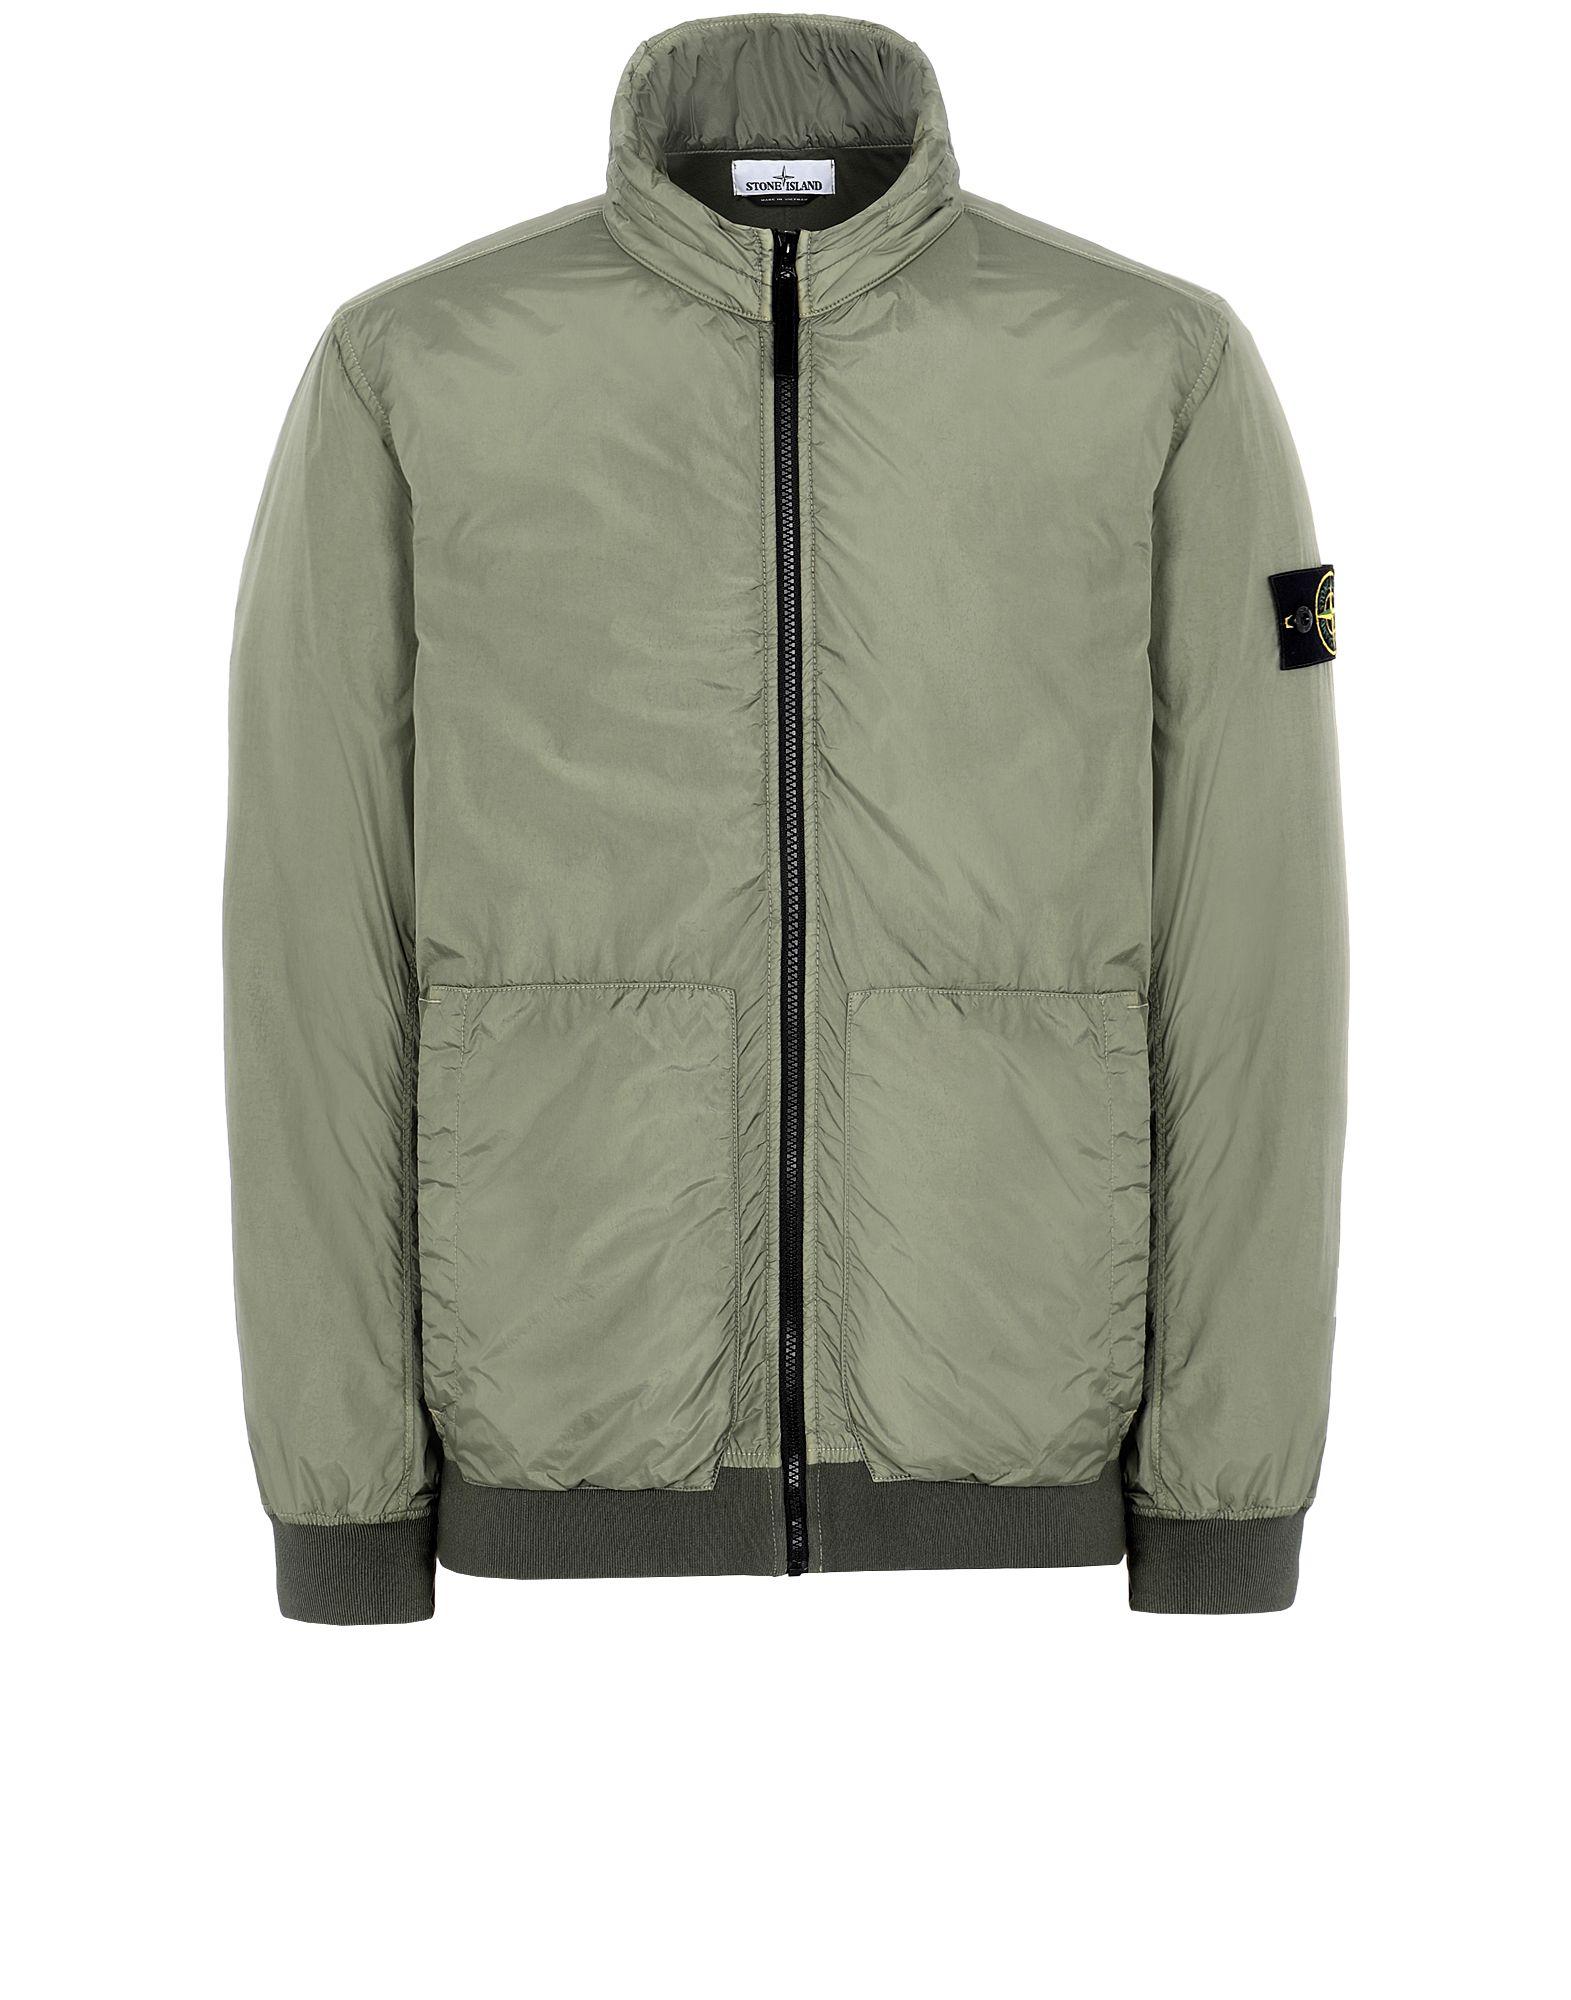 Stone Island Synthetic 43230 Garment Dyed Crinkle Reps Ny in Olive Green  (Green) for Men - Lyst